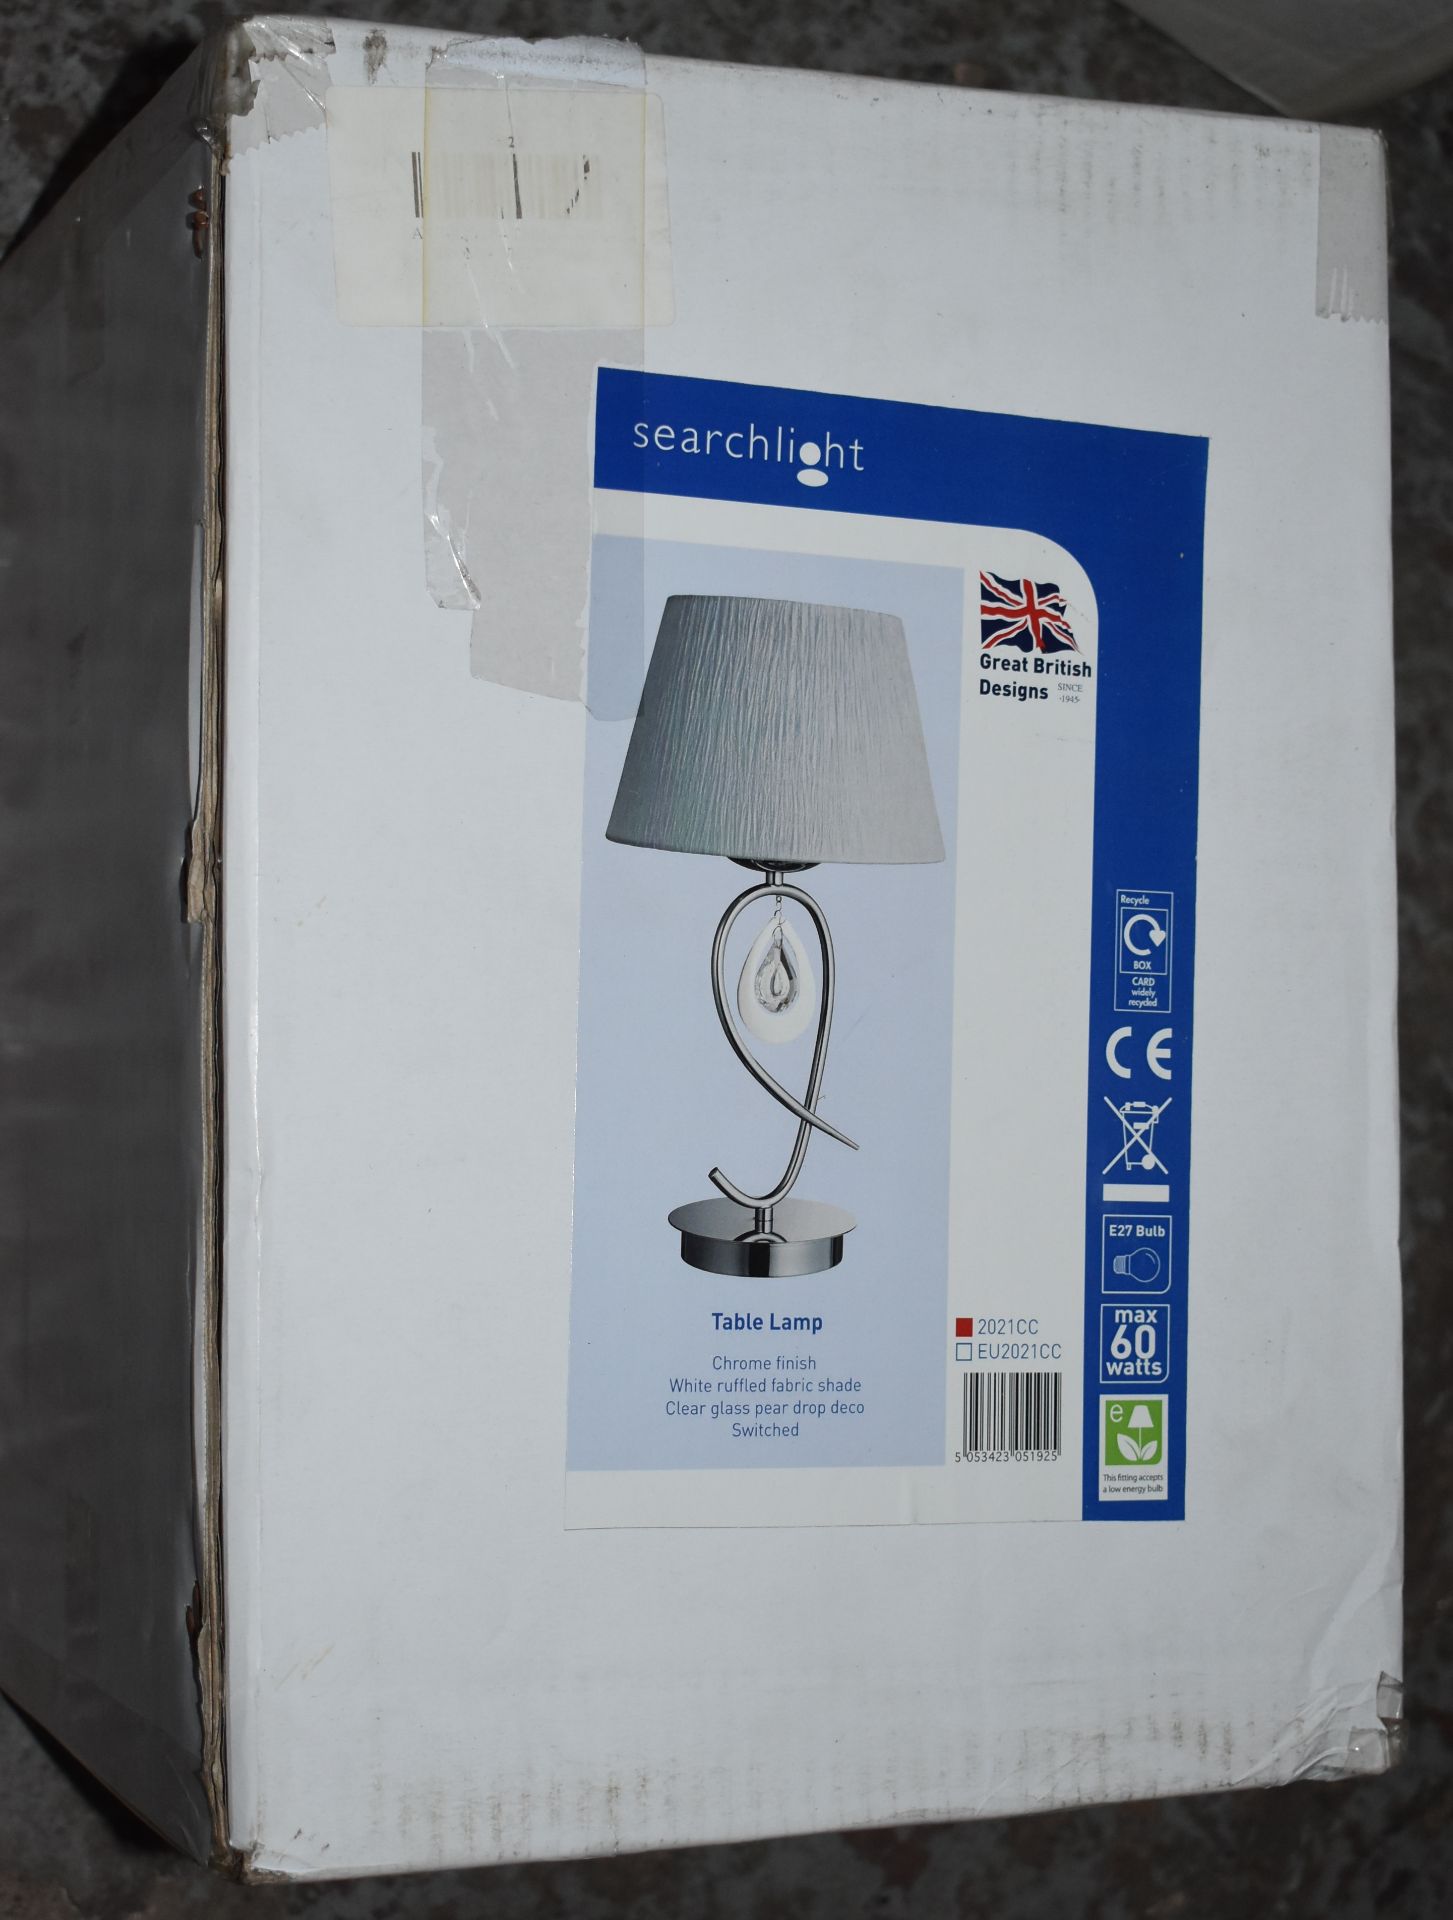 1 x Searchlight Angelique Table Lamp With Chrome Finish, White Ruffled Fabric Shade and Clear - Image 2 of 2